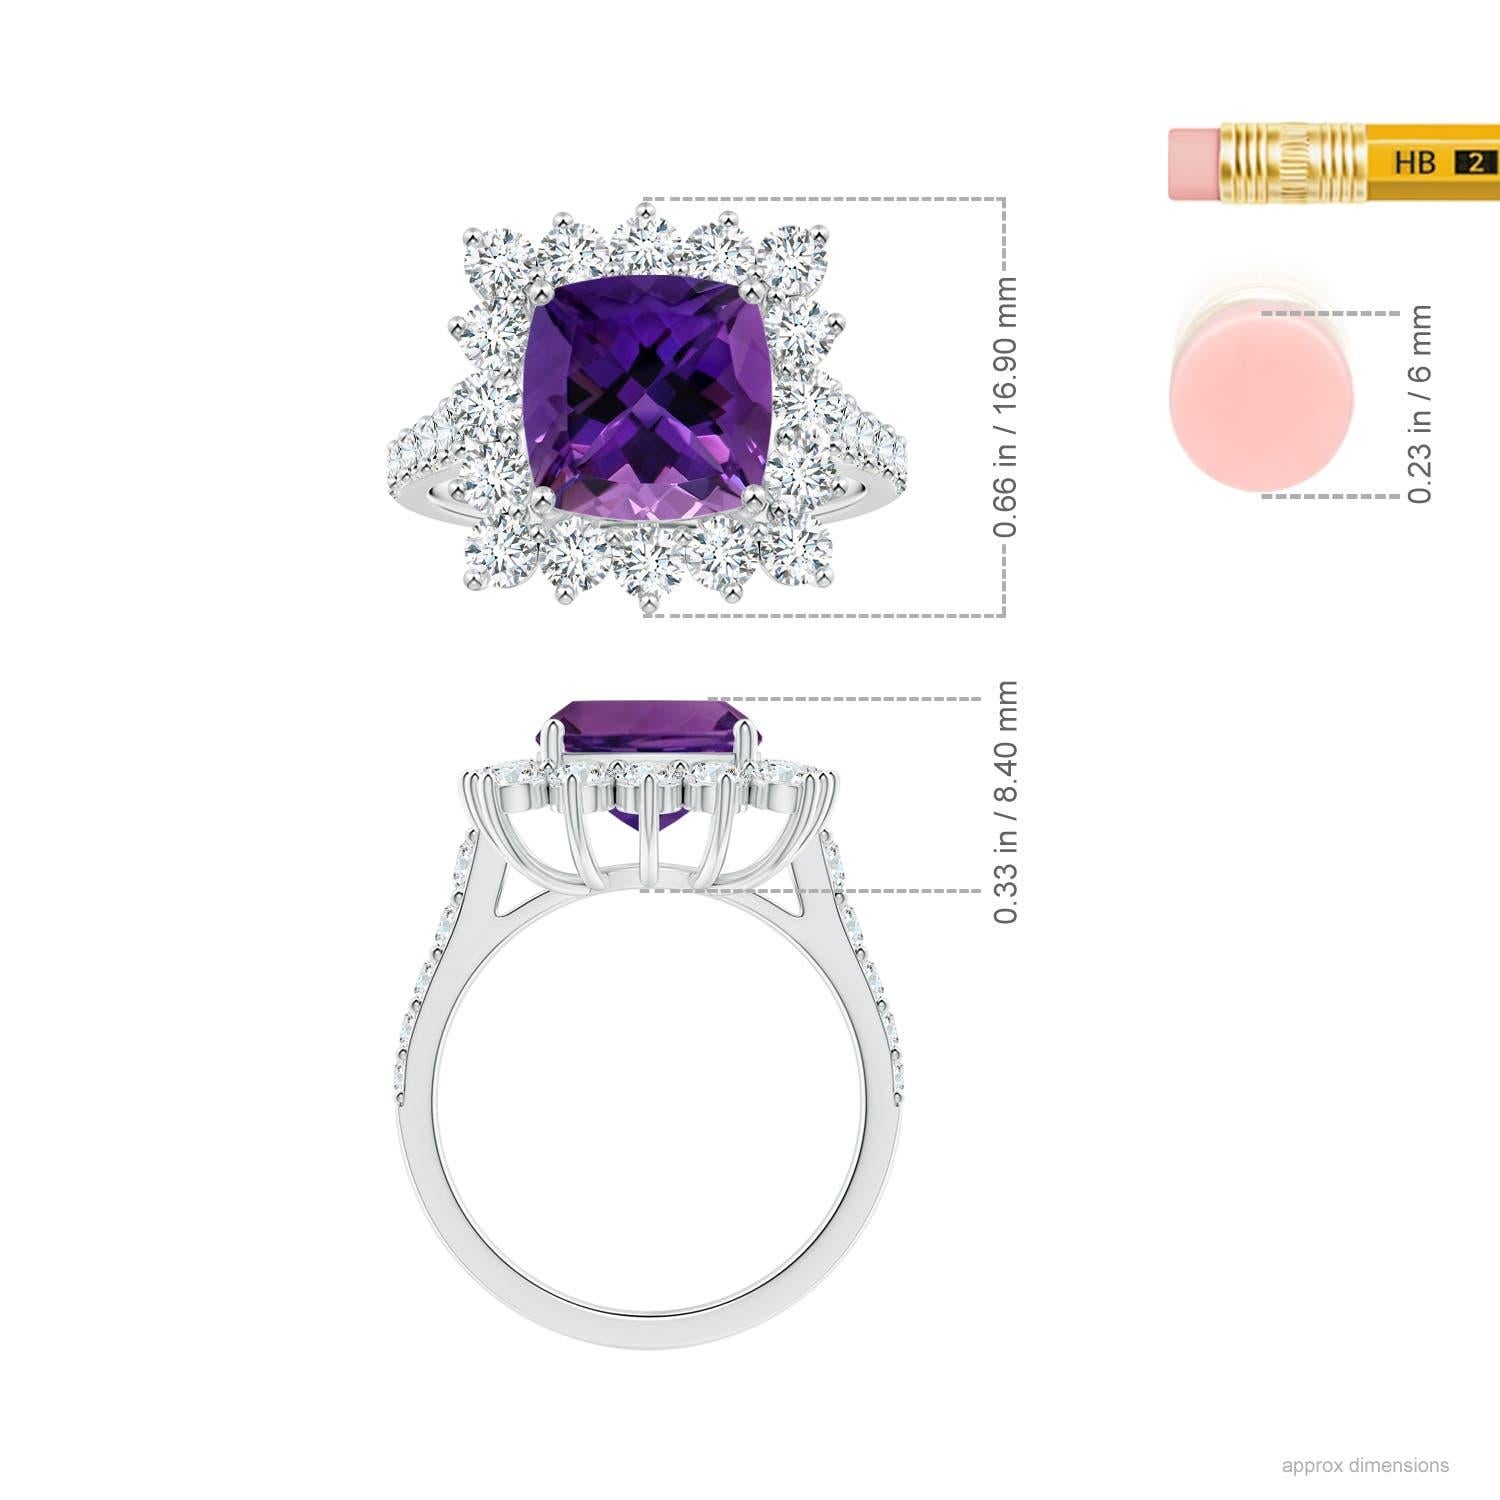 For Sale:  Angara Princess Diana Inspired Gia Certified Cushion Amethyst Ring in Platinum 5